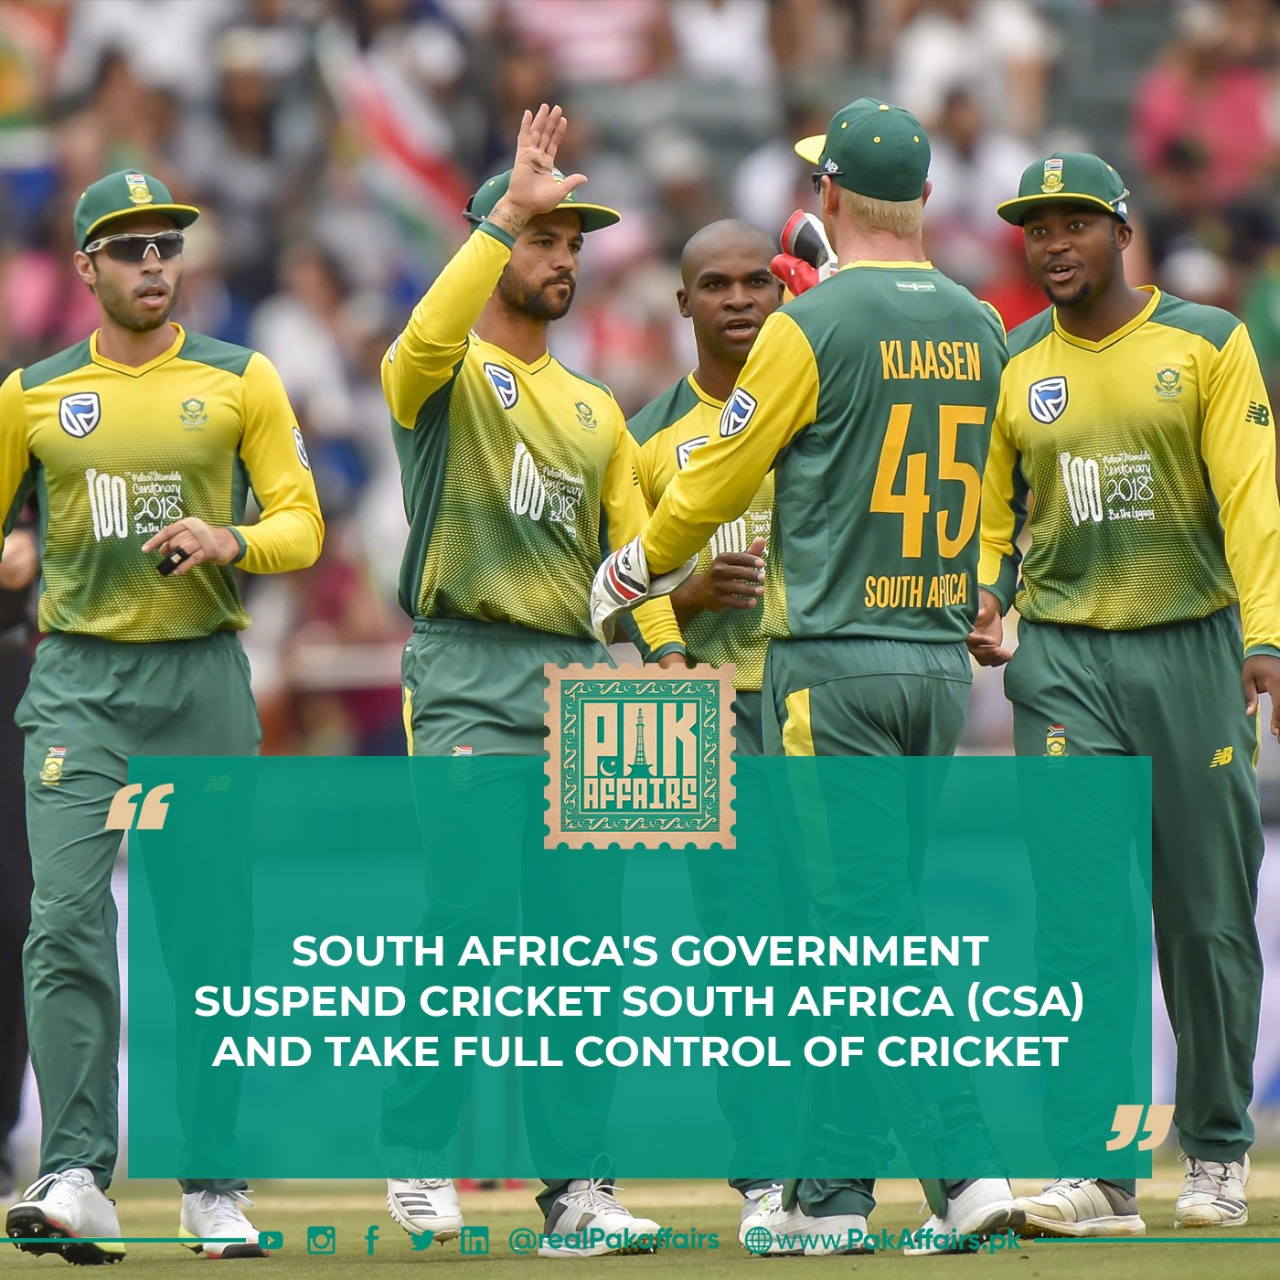 South Africa's government suspend Cricket South Africa (CSA) and take full control of cricket.